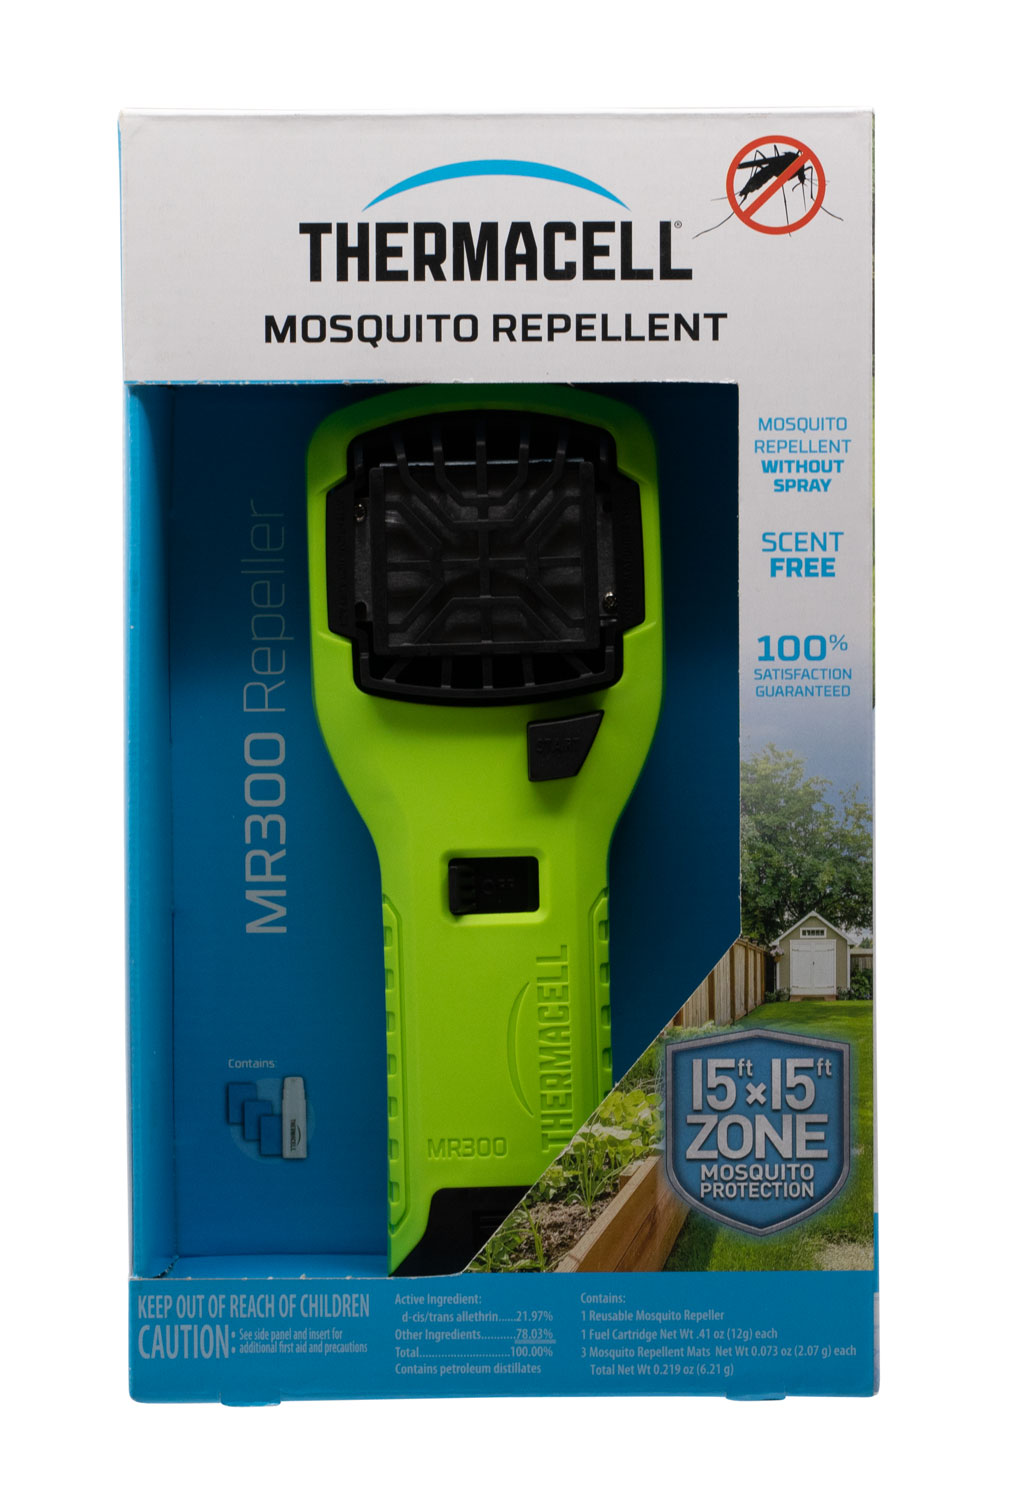 Thermacell MR300V MR300 Portable Repeller Yellow Effective 15 ft Odorless Scent Repels Mosquito Effective Up to 12 hrs